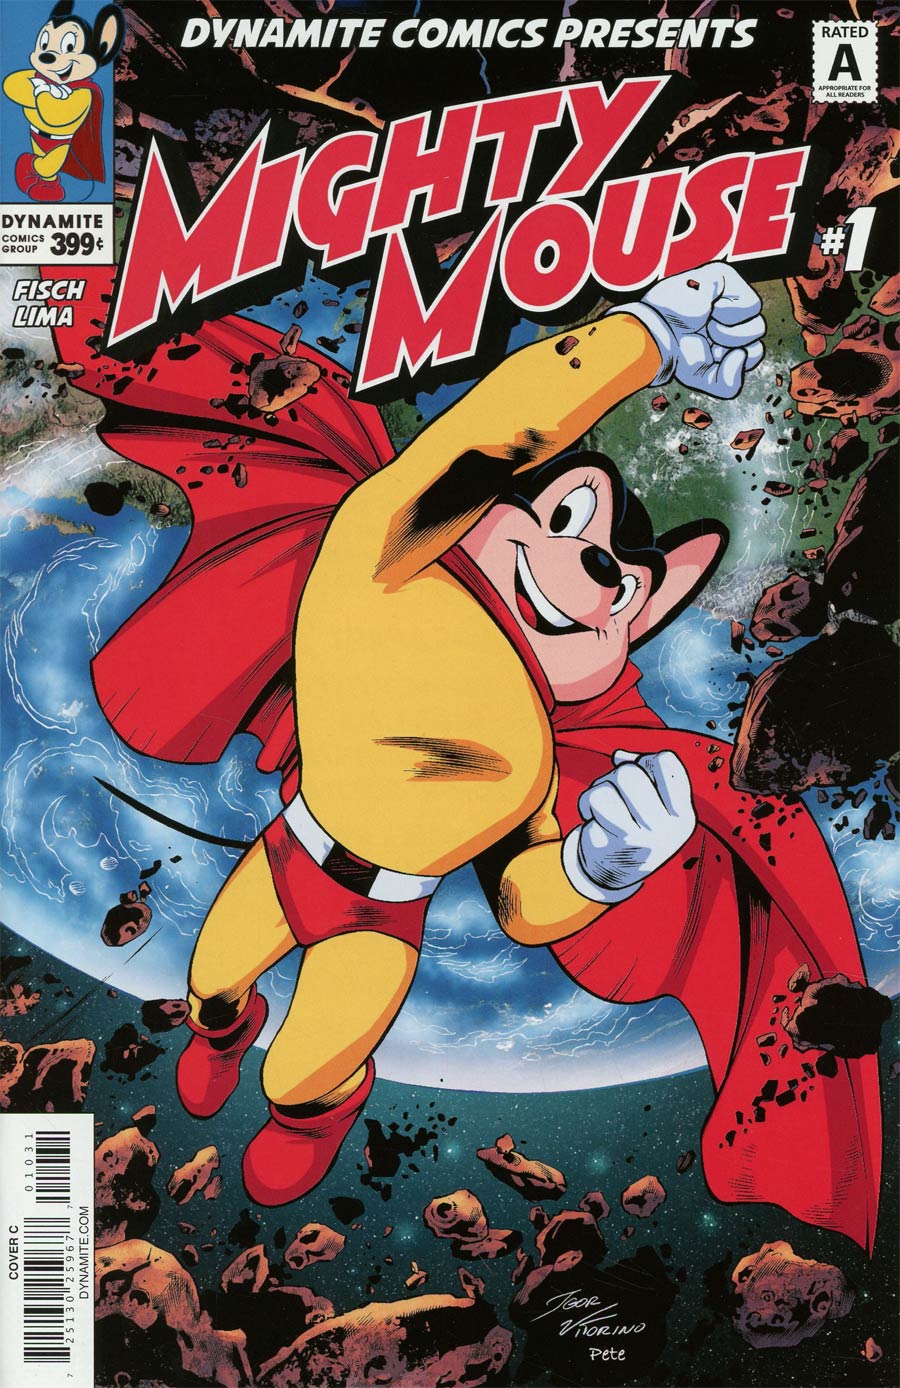 Mighty Mouse Vol 5 #1 Cover C Variant Igor Lima Cover